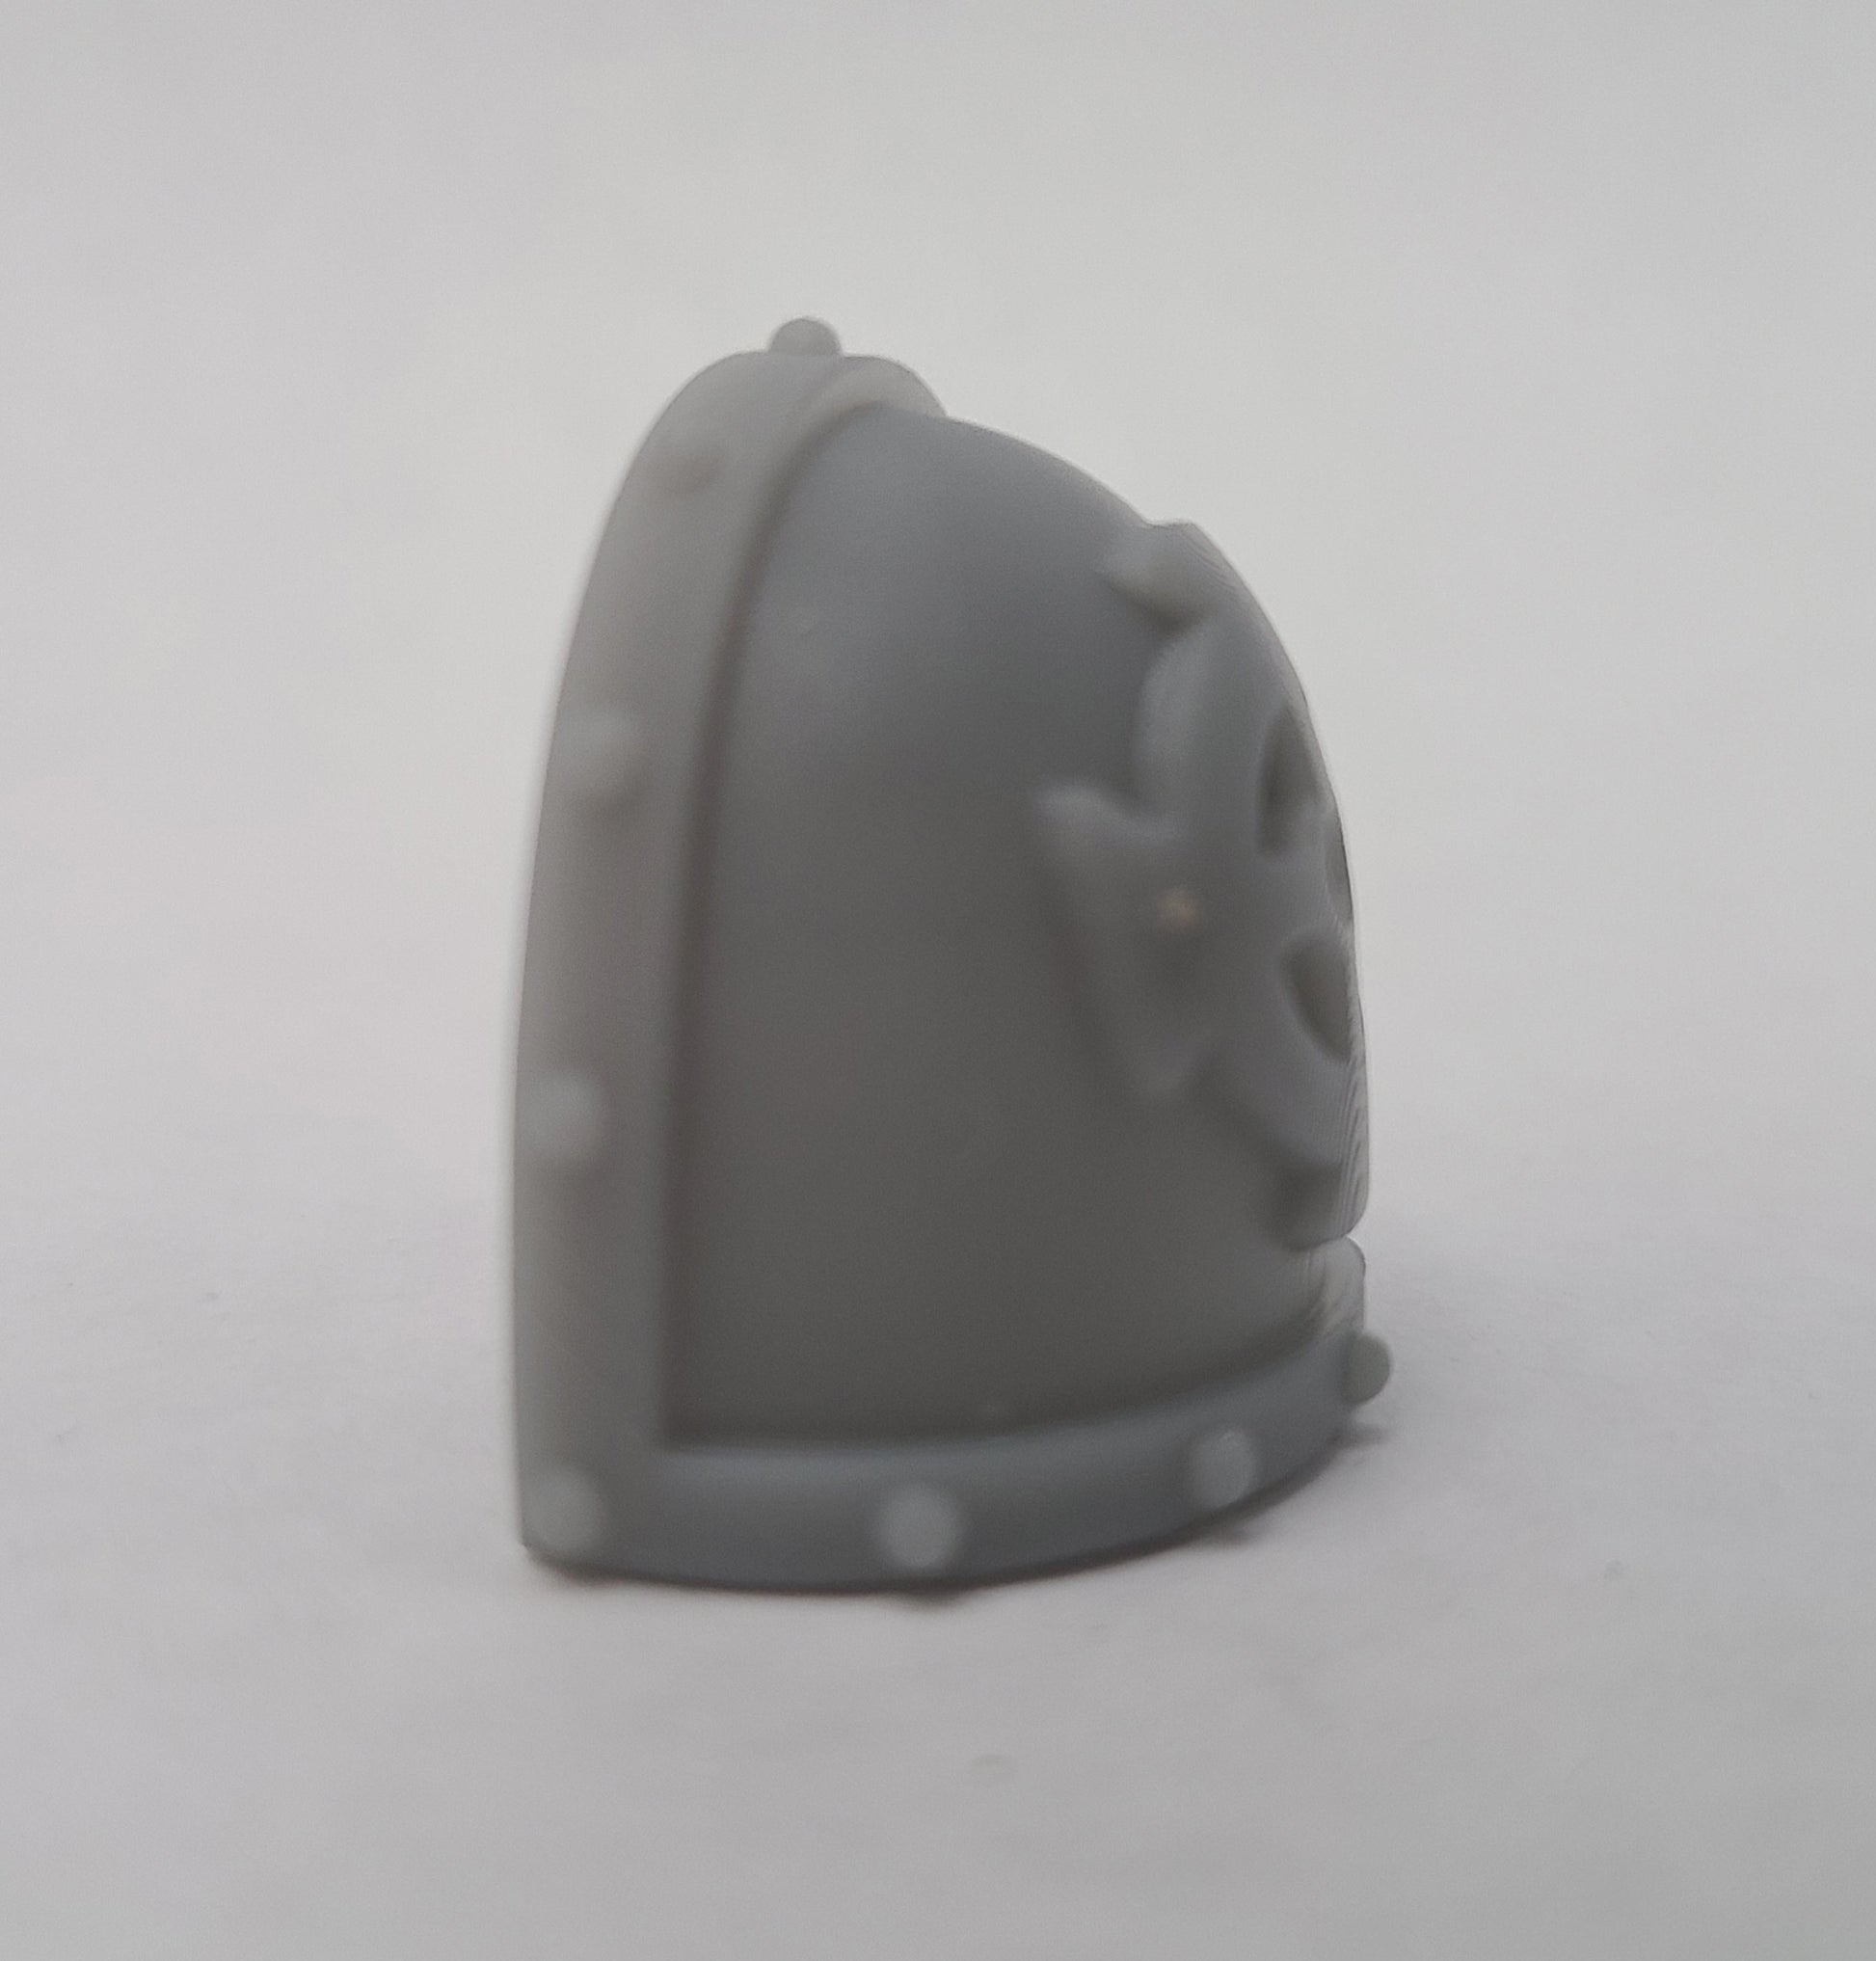 Fell Blooded Culann Blades MKVII Shoulder Pad Studded compatible with JoyToy Space Marine Action Figures by 18th Scale Armory Right